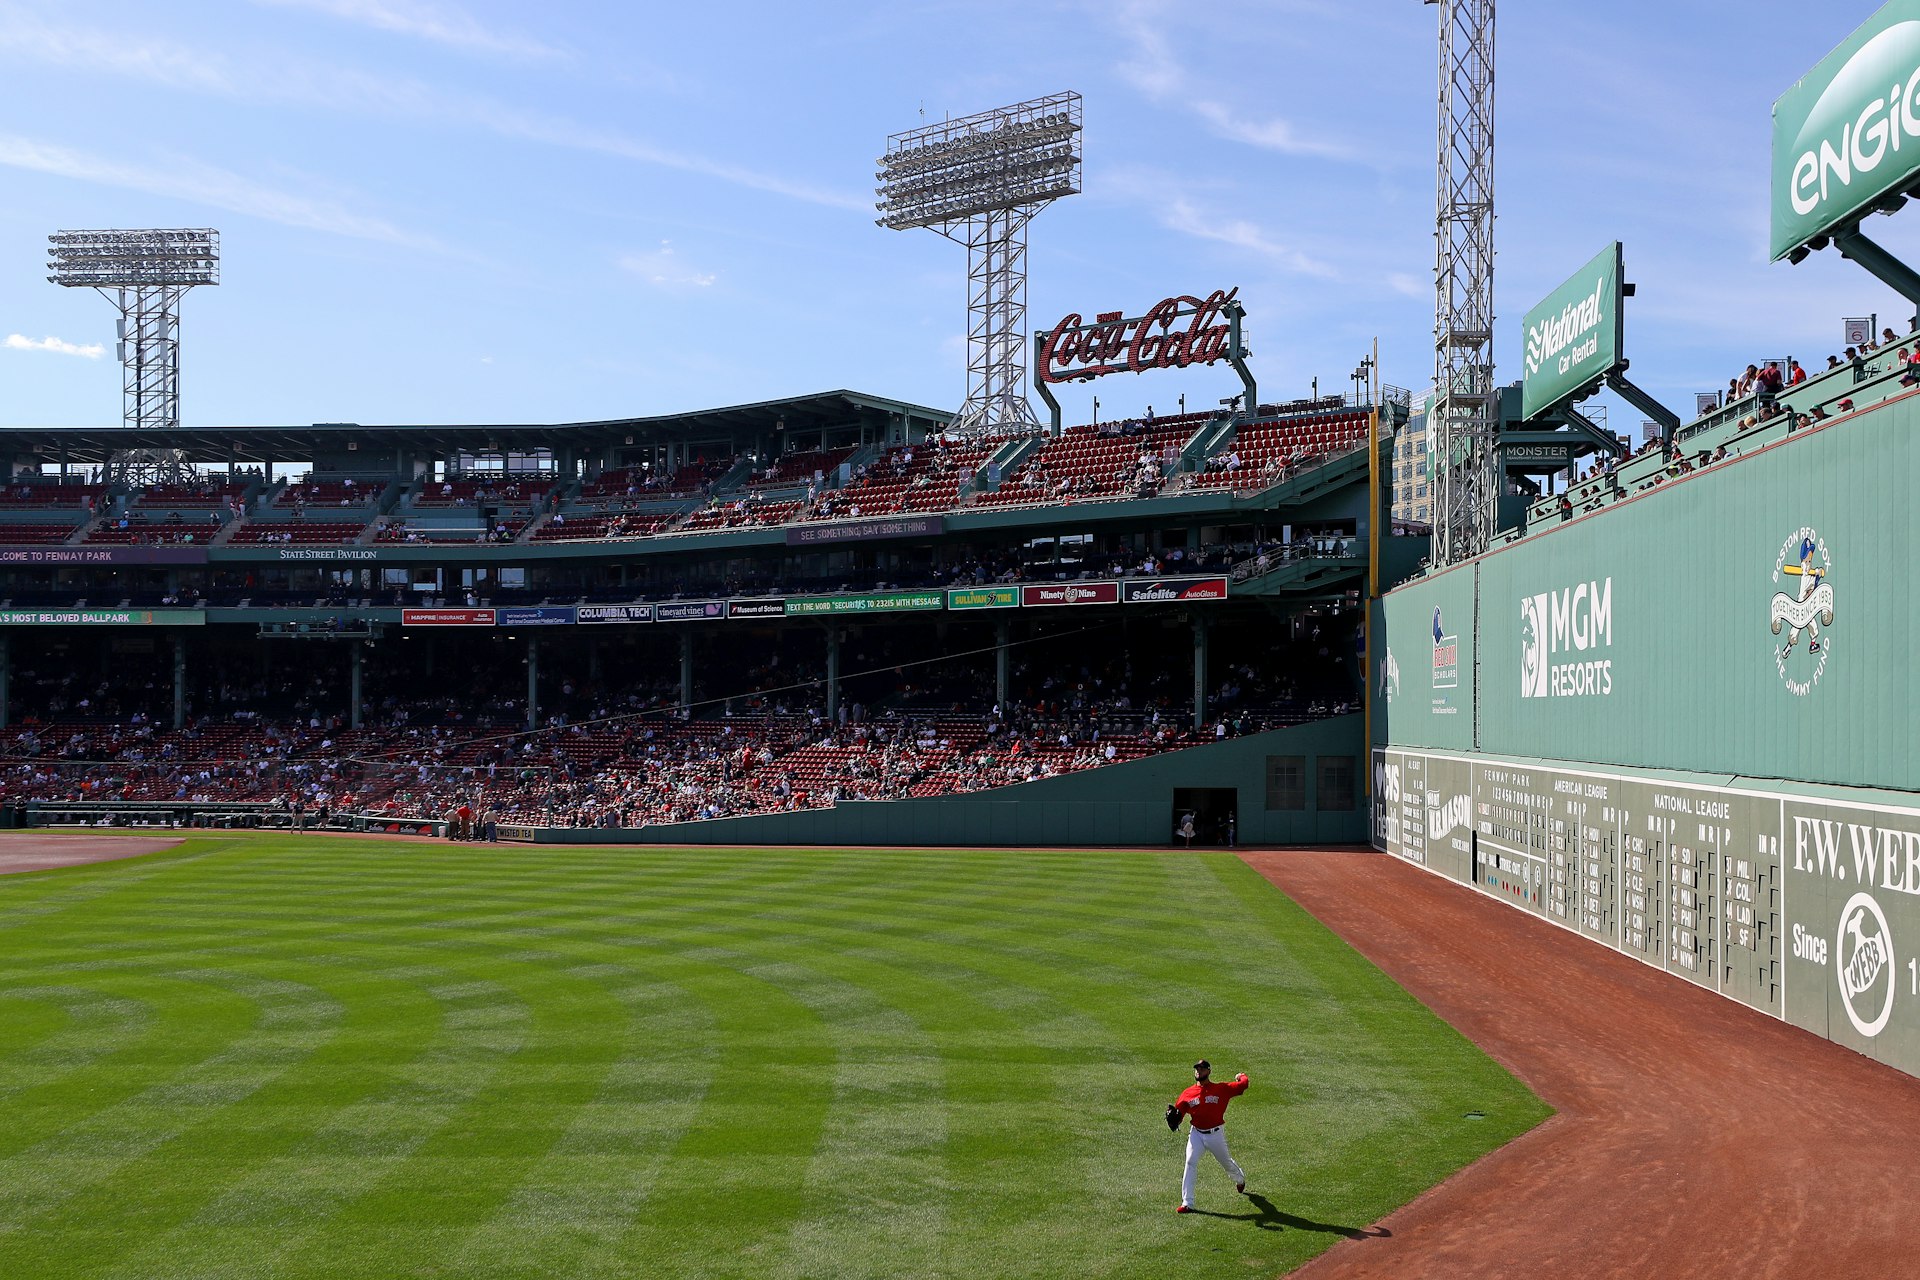 A baseball player fields a ball next to the large wall called the Green Monster in Fenway Park, Boston